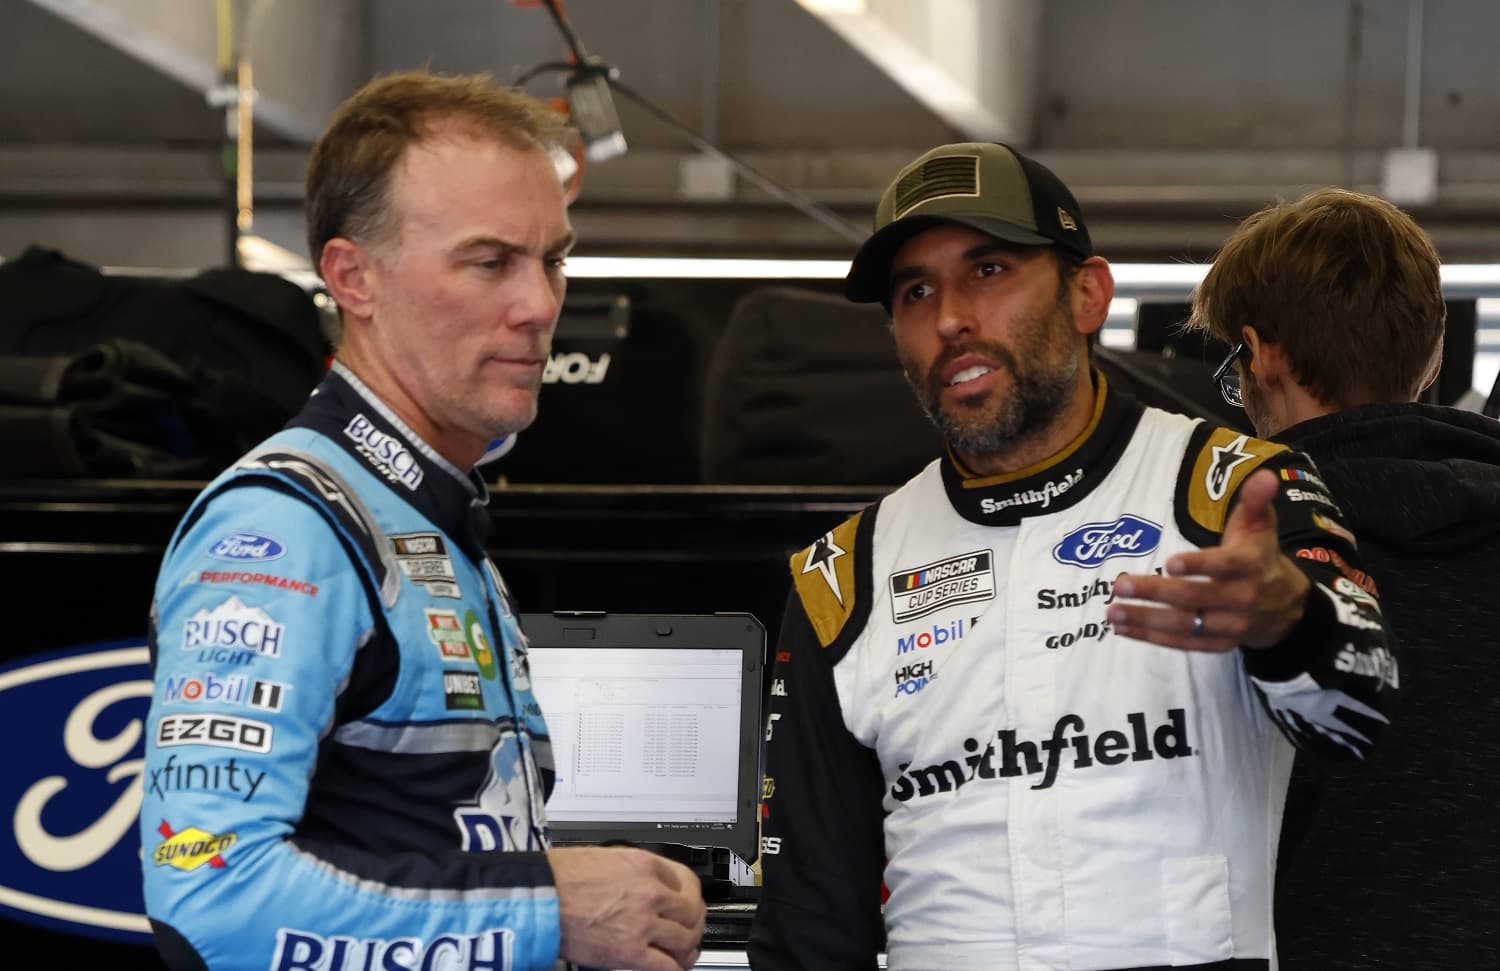 Kevin Harvick talks with Aric Almirola during NASCAR Cup Series Next Gen testing at Charlotte Motor Speedway on Nov. 17, 2021.